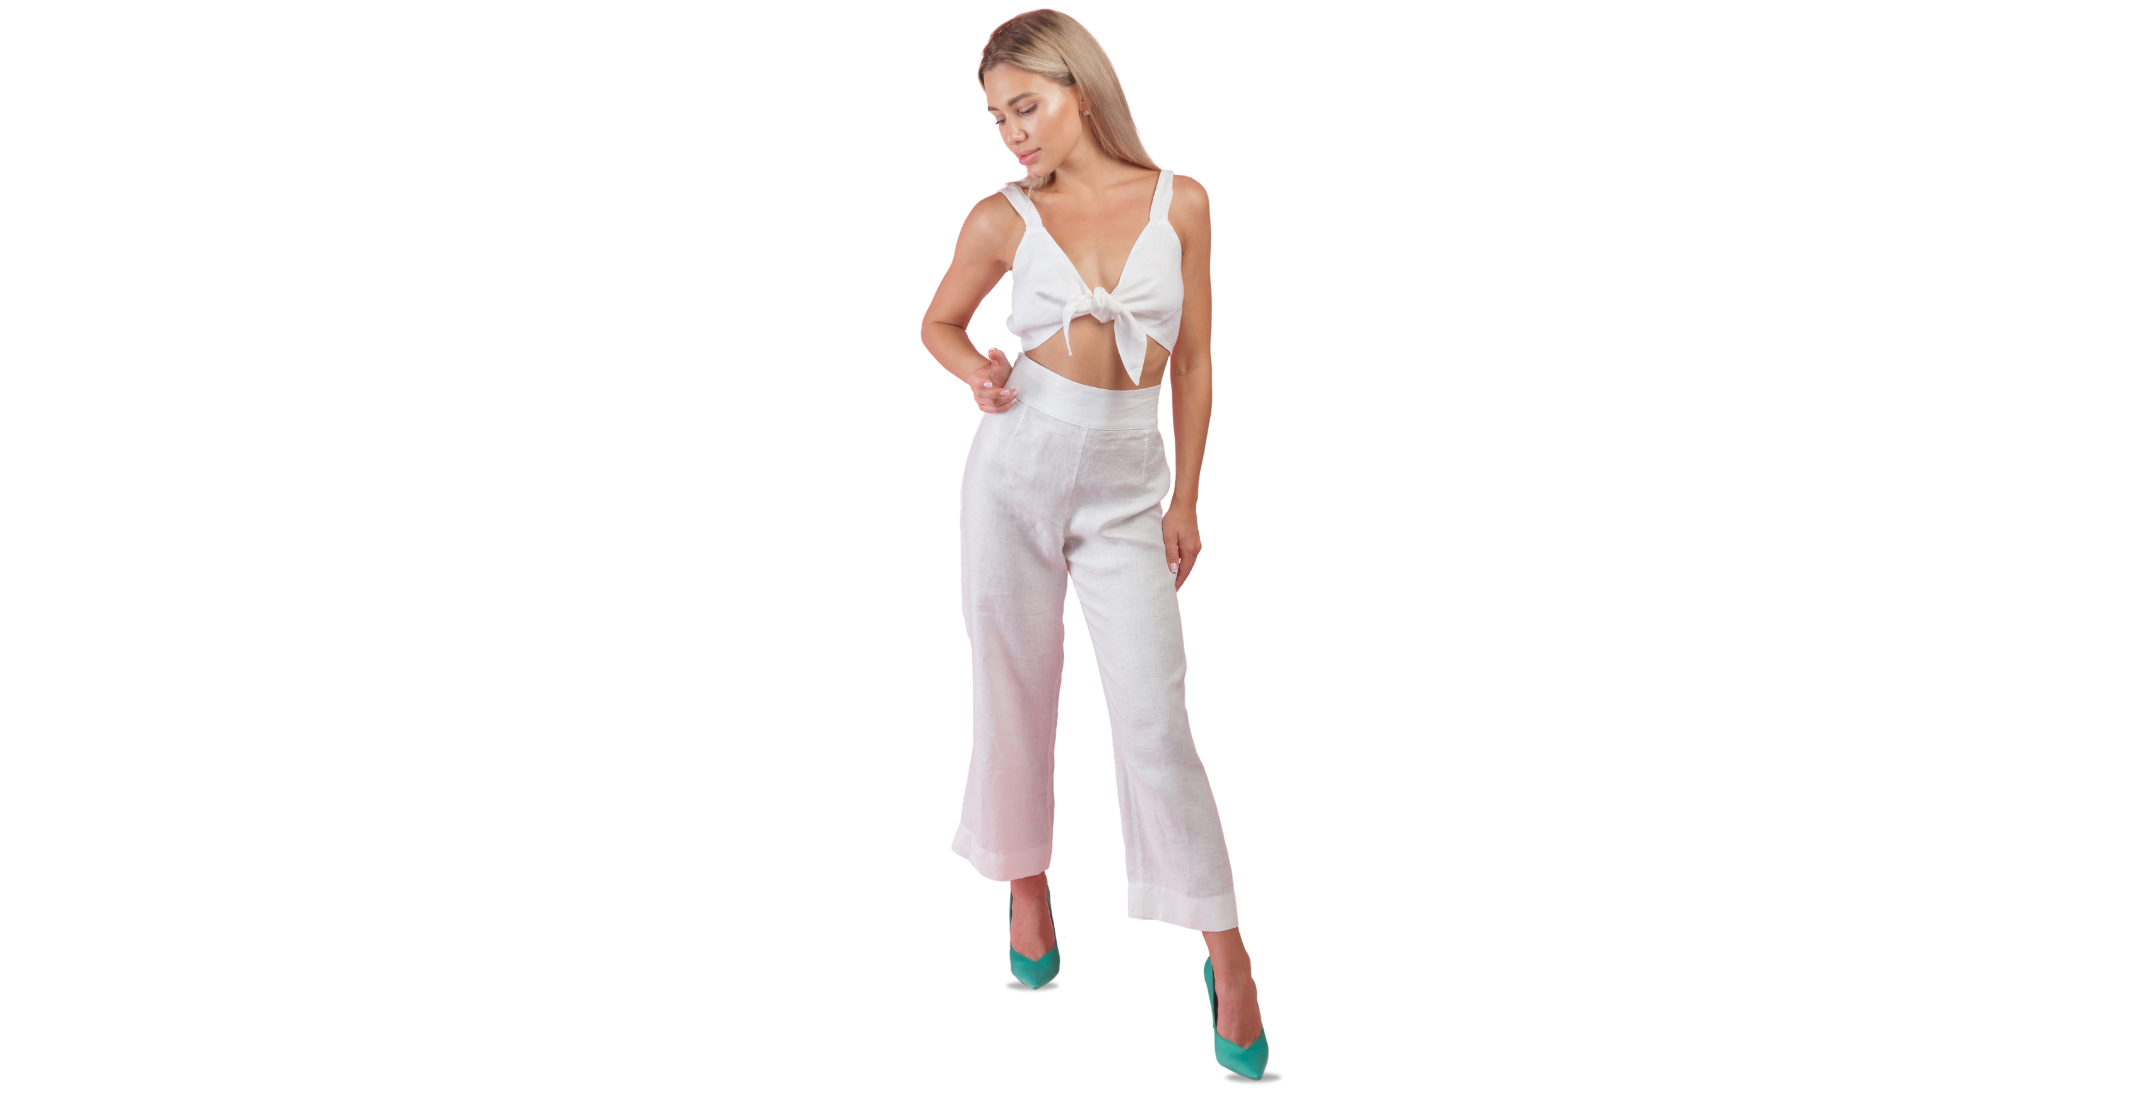 shreekama-western-wear-party-dress-crop-top-and-pant-power-chic-and-comfortable-party-outfit-ideas